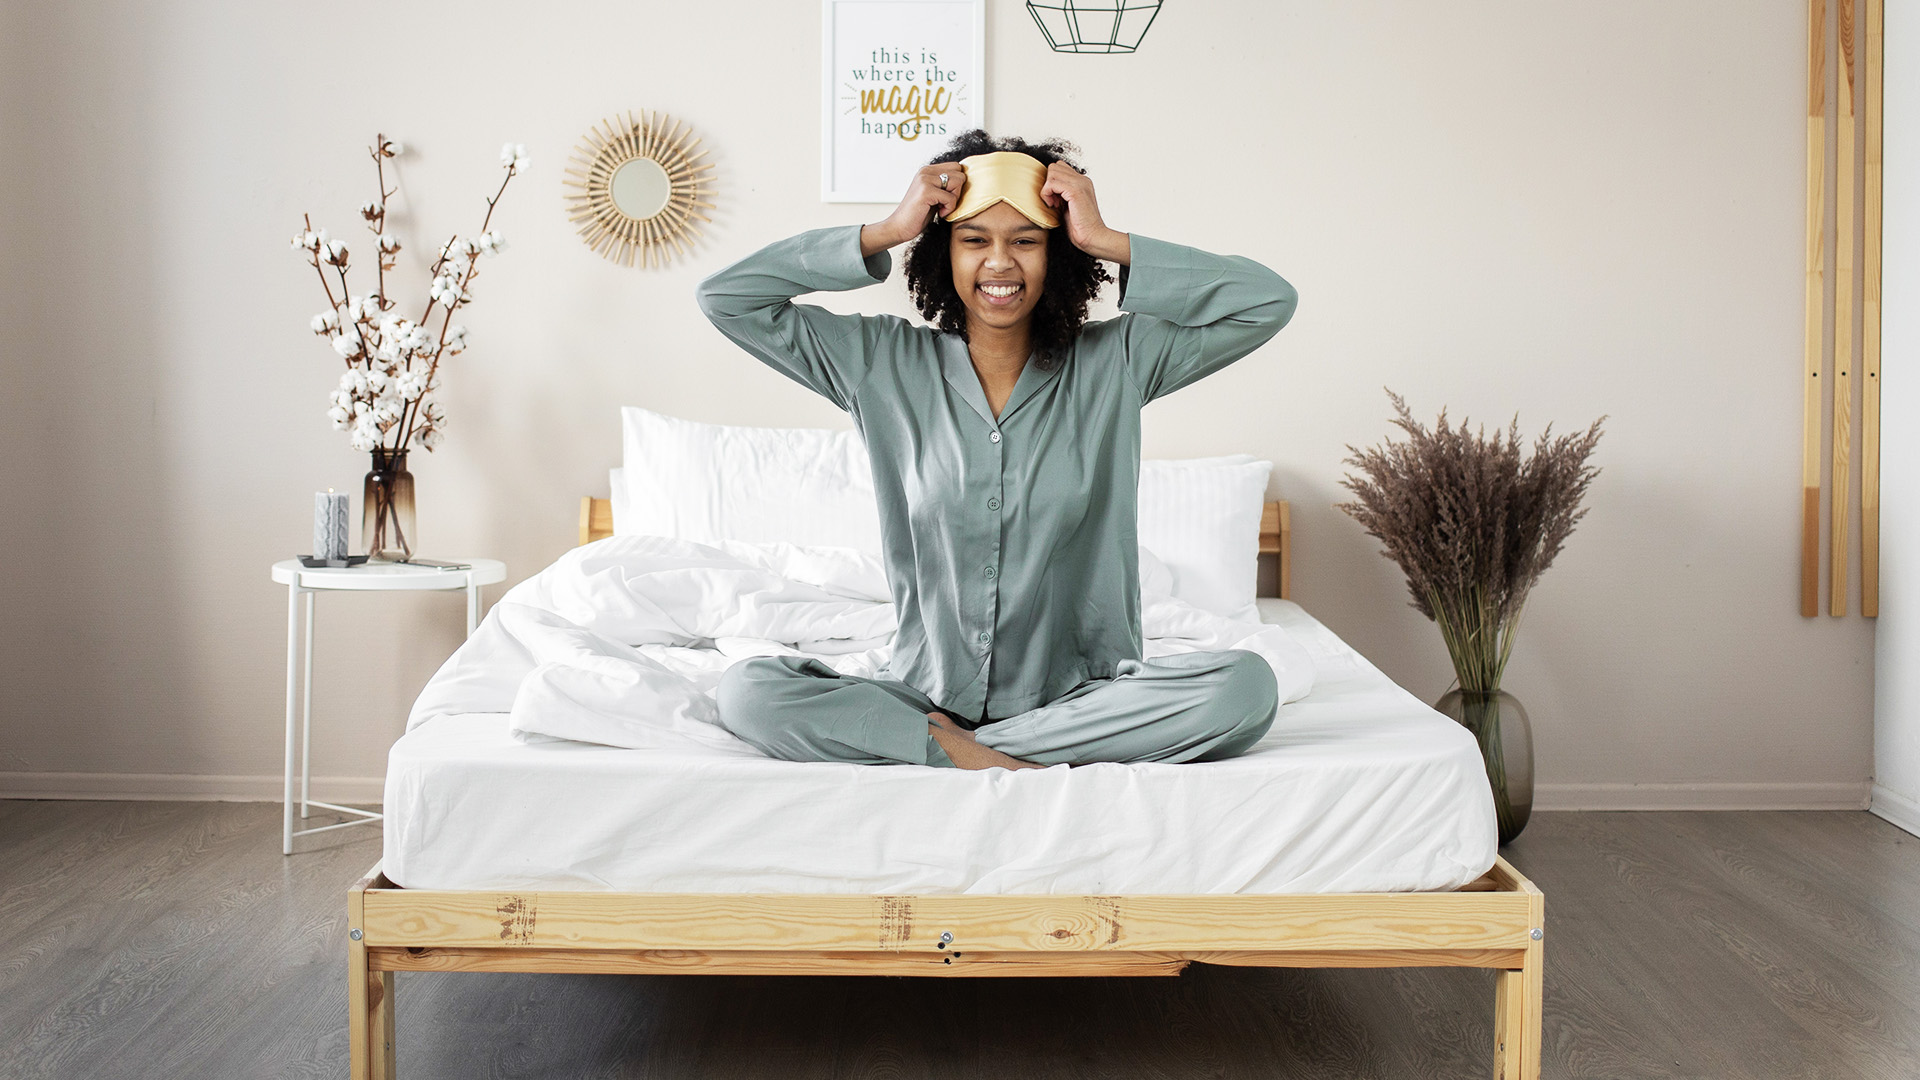 7 habits of a good sleeper that can help boost your sleep quality